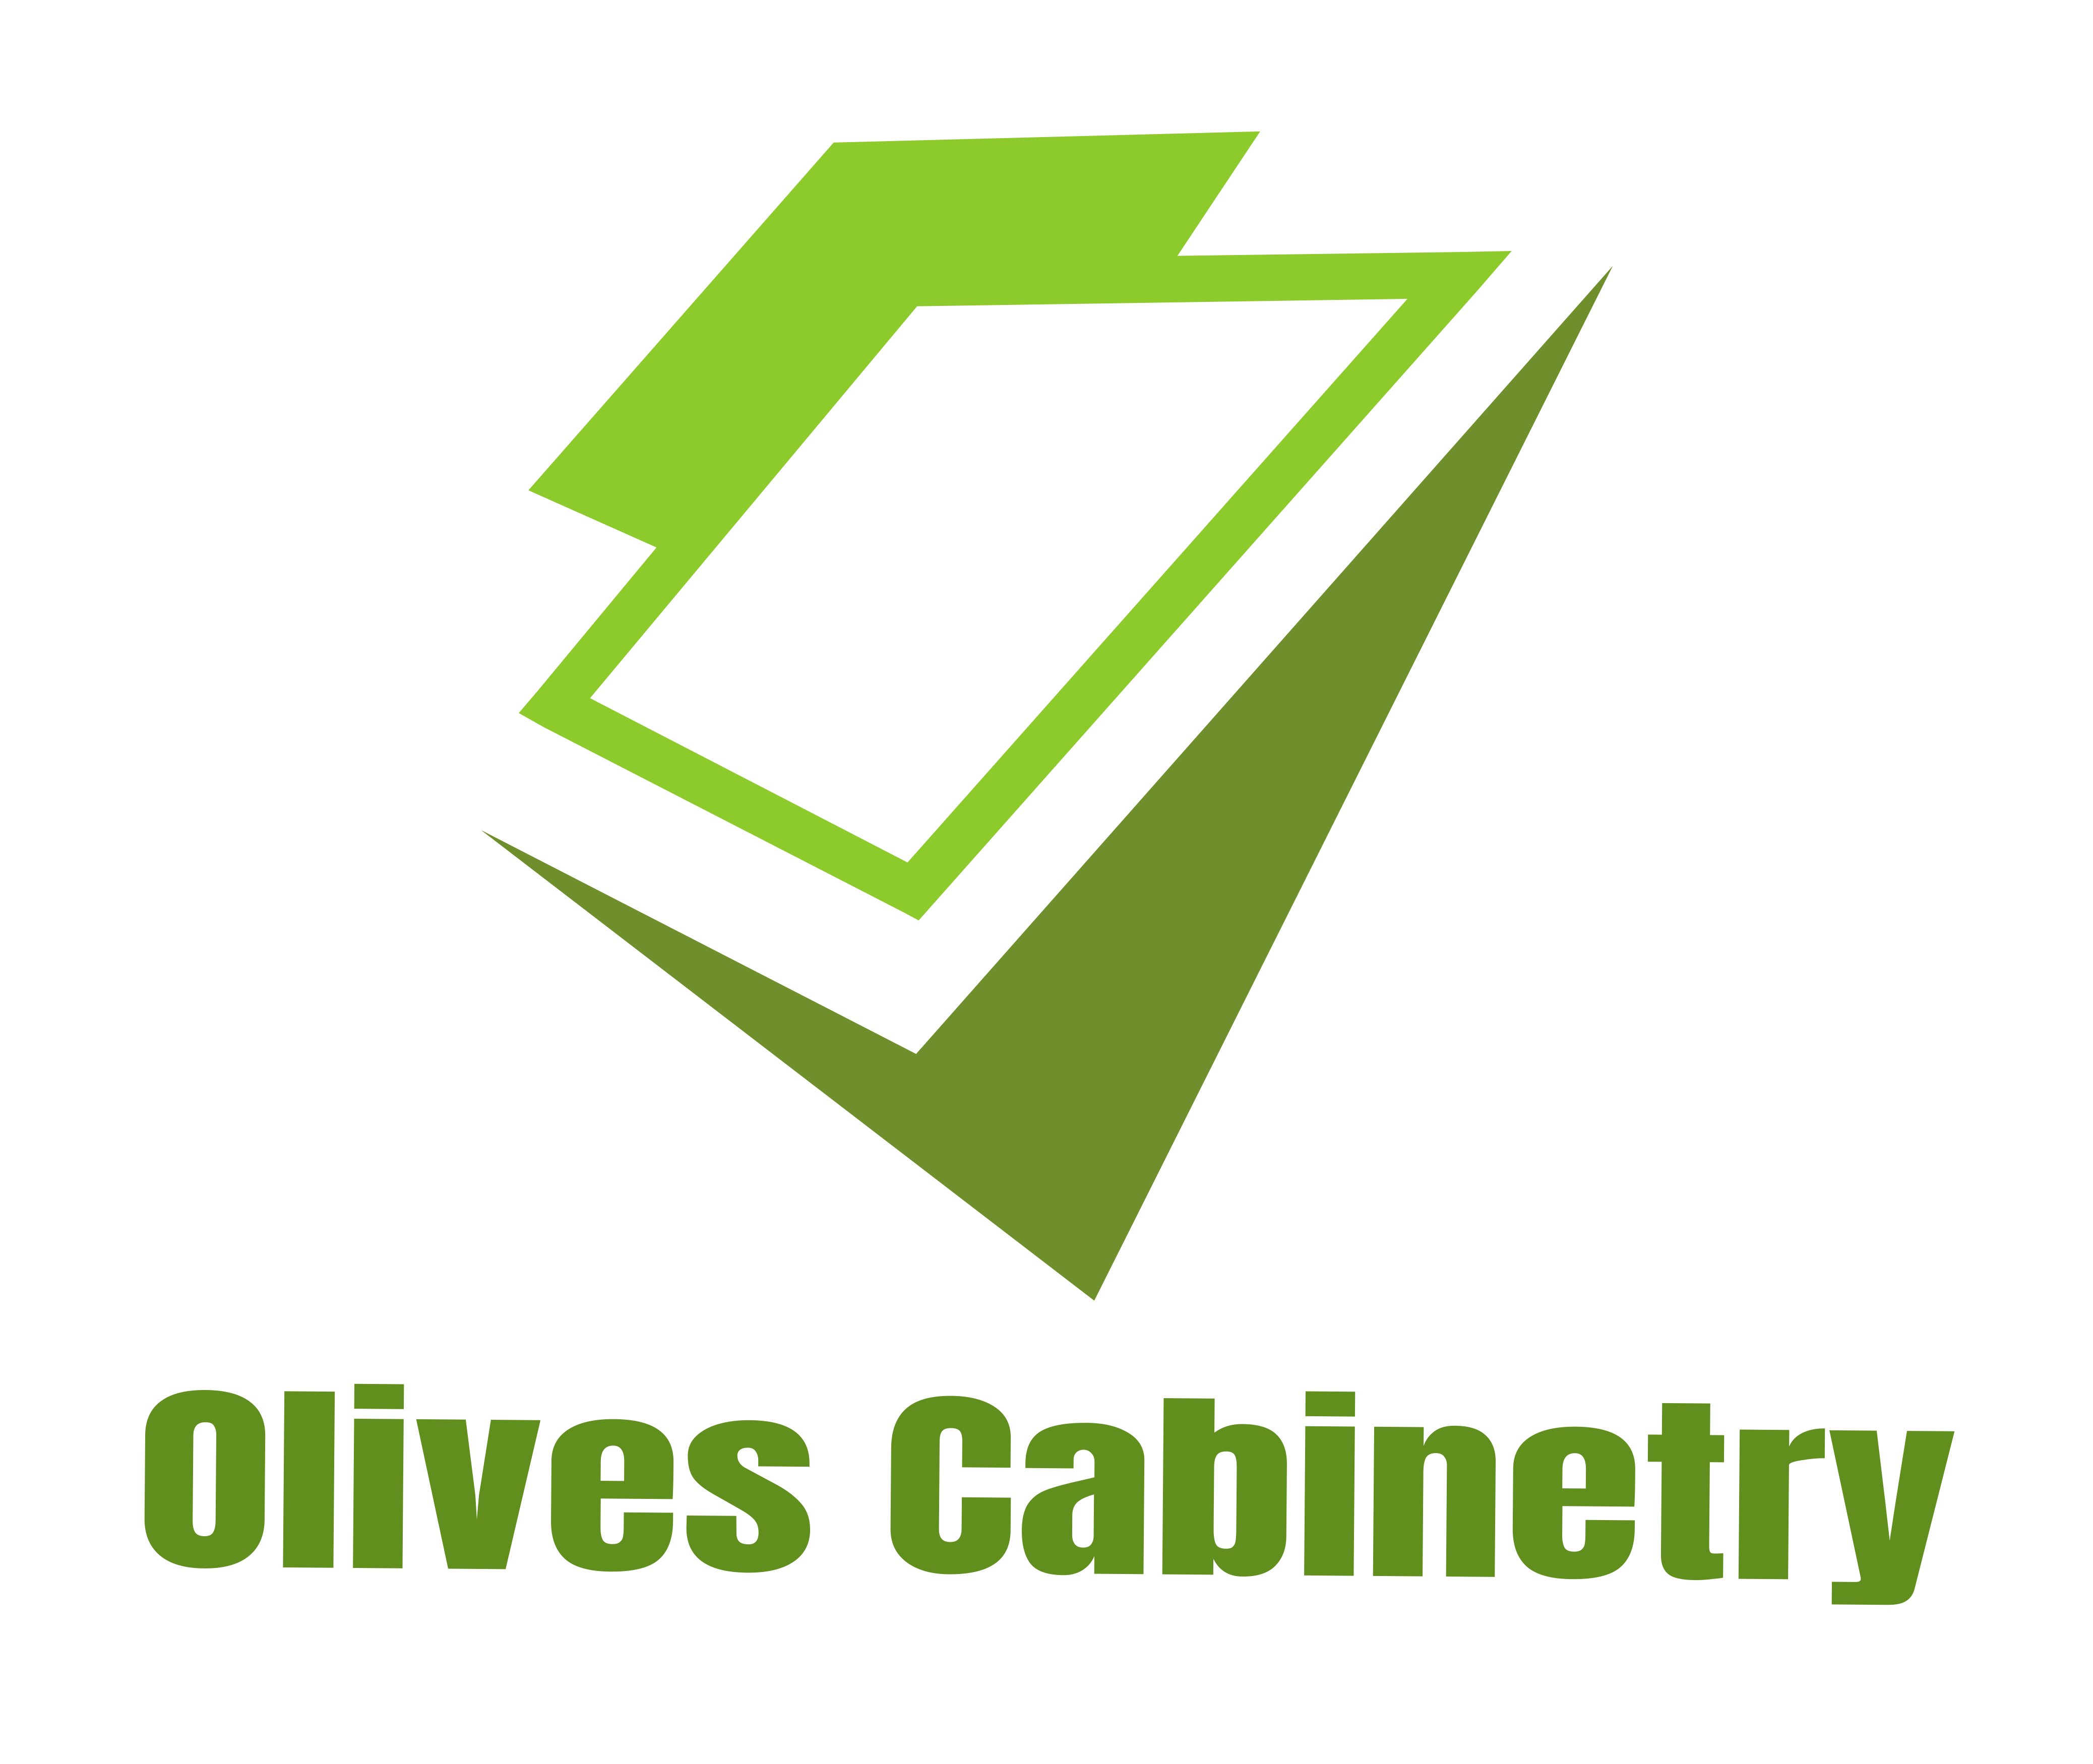 Olives Cabinetry